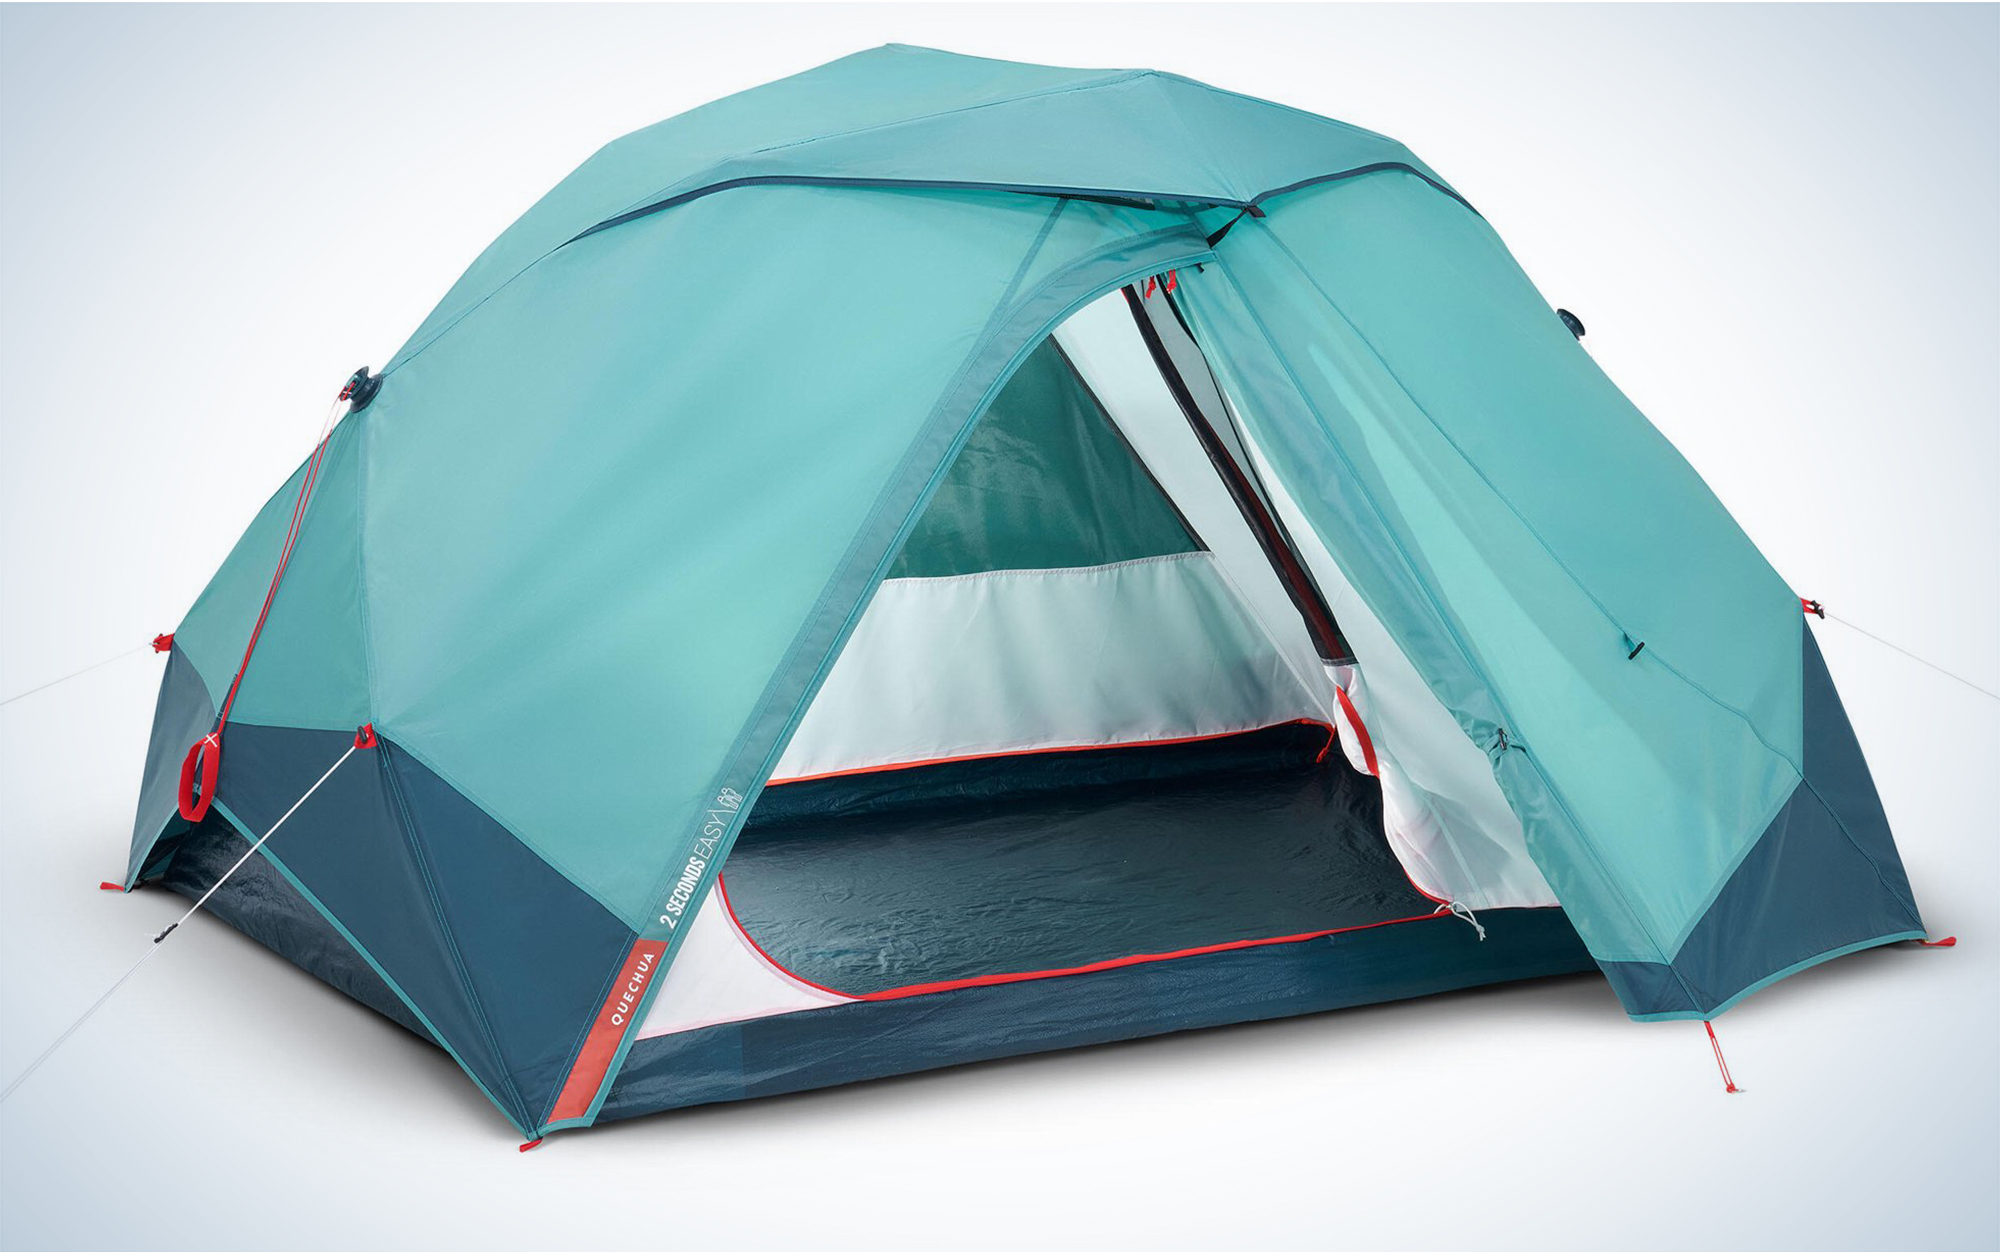 The Decathlon Quechua 2 Second Pop-UpÂ is one of the best camping tents.